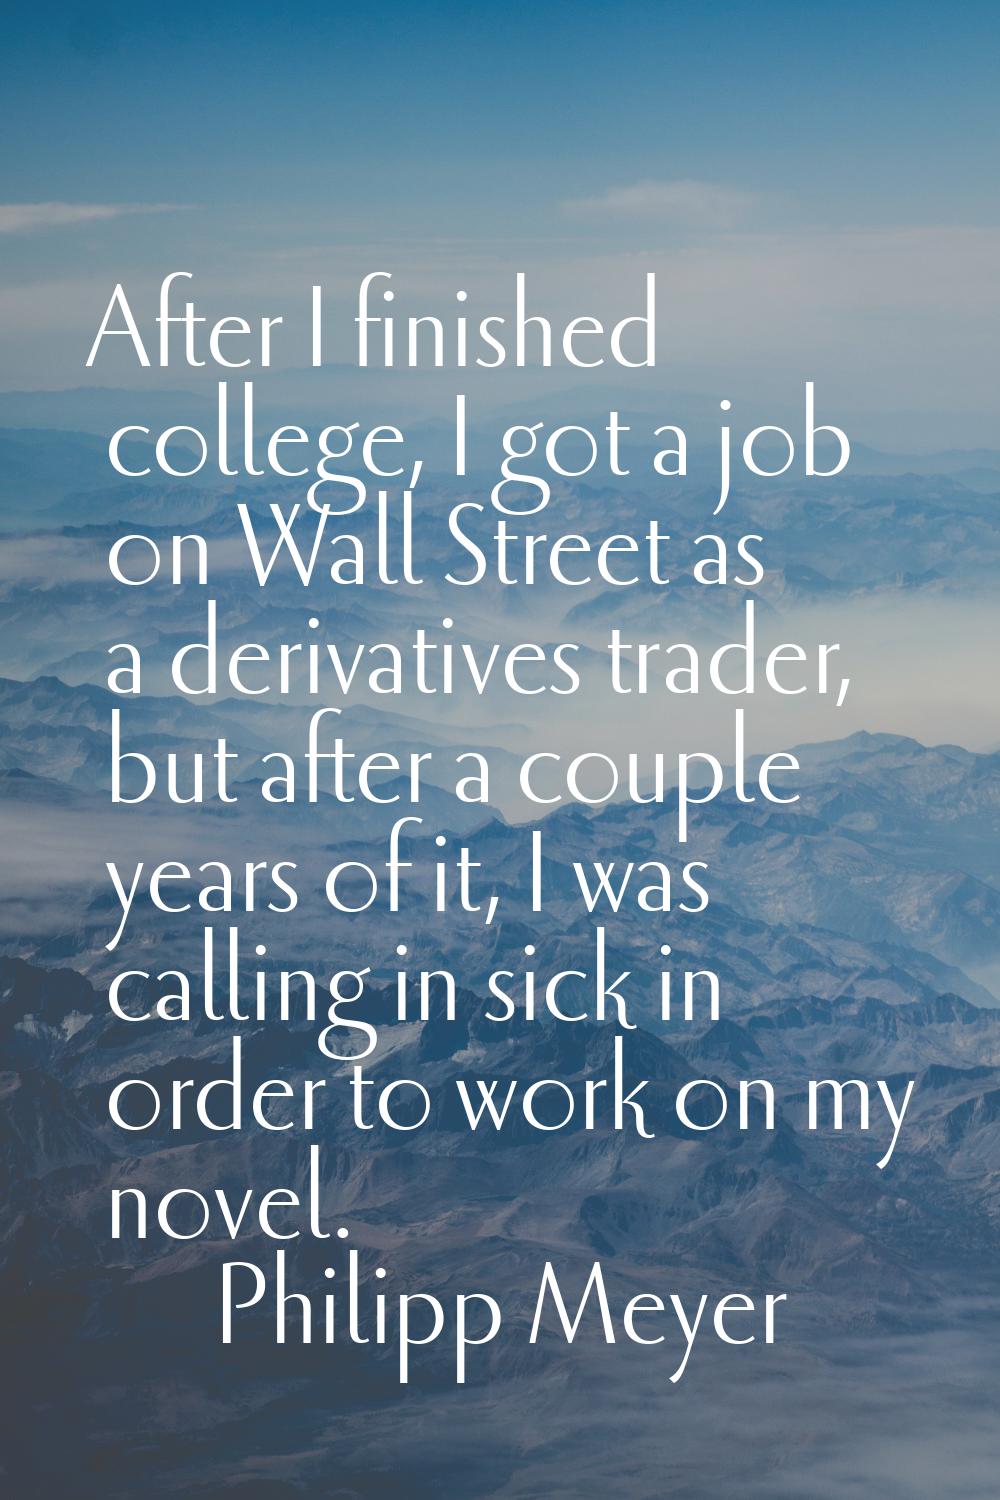 After I finished college, I got a job on Wall Street as a derivatives trader, but after a couple ye